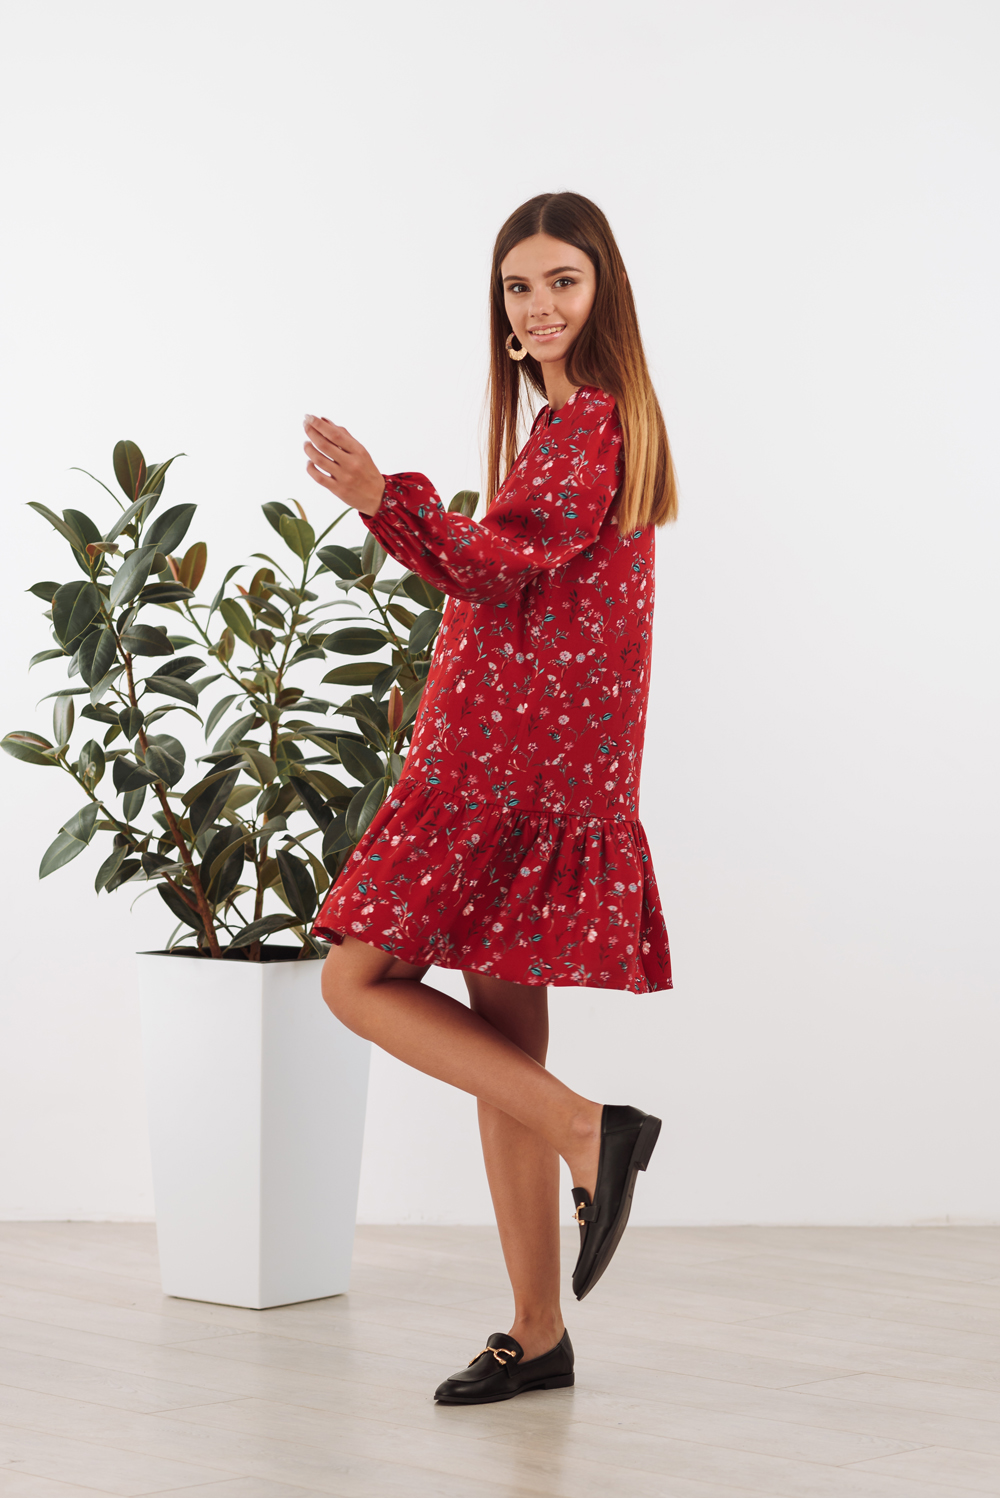 Autumn dress in floral print